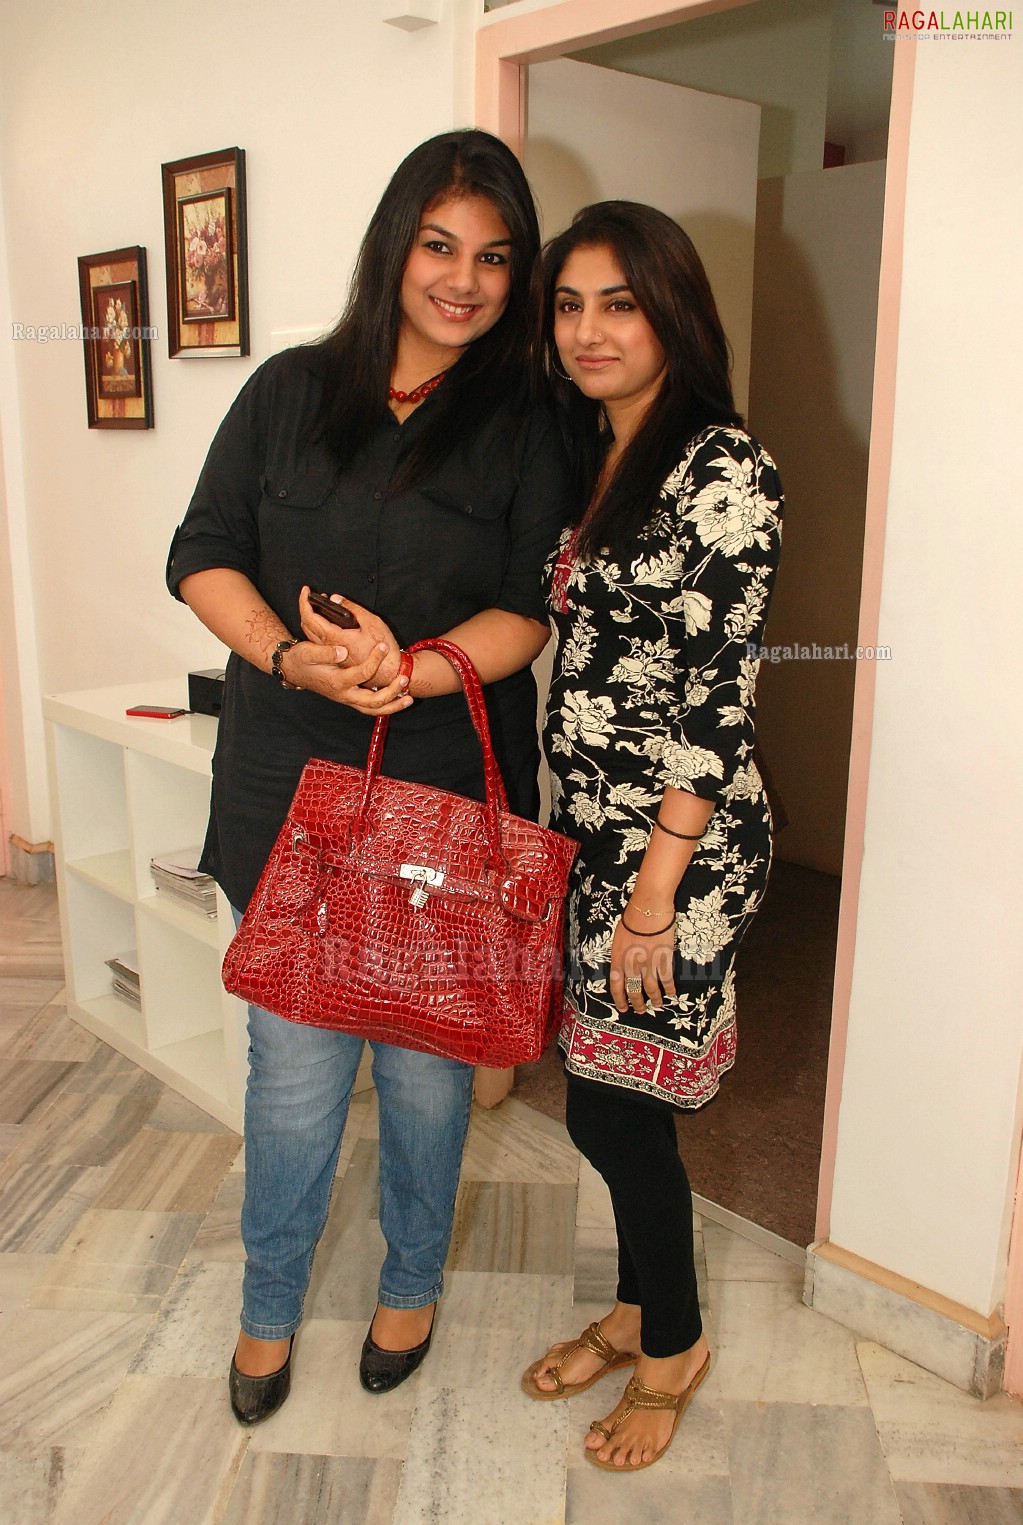 Chash of India Arabesque Beauty Salon & Day Spa Launch